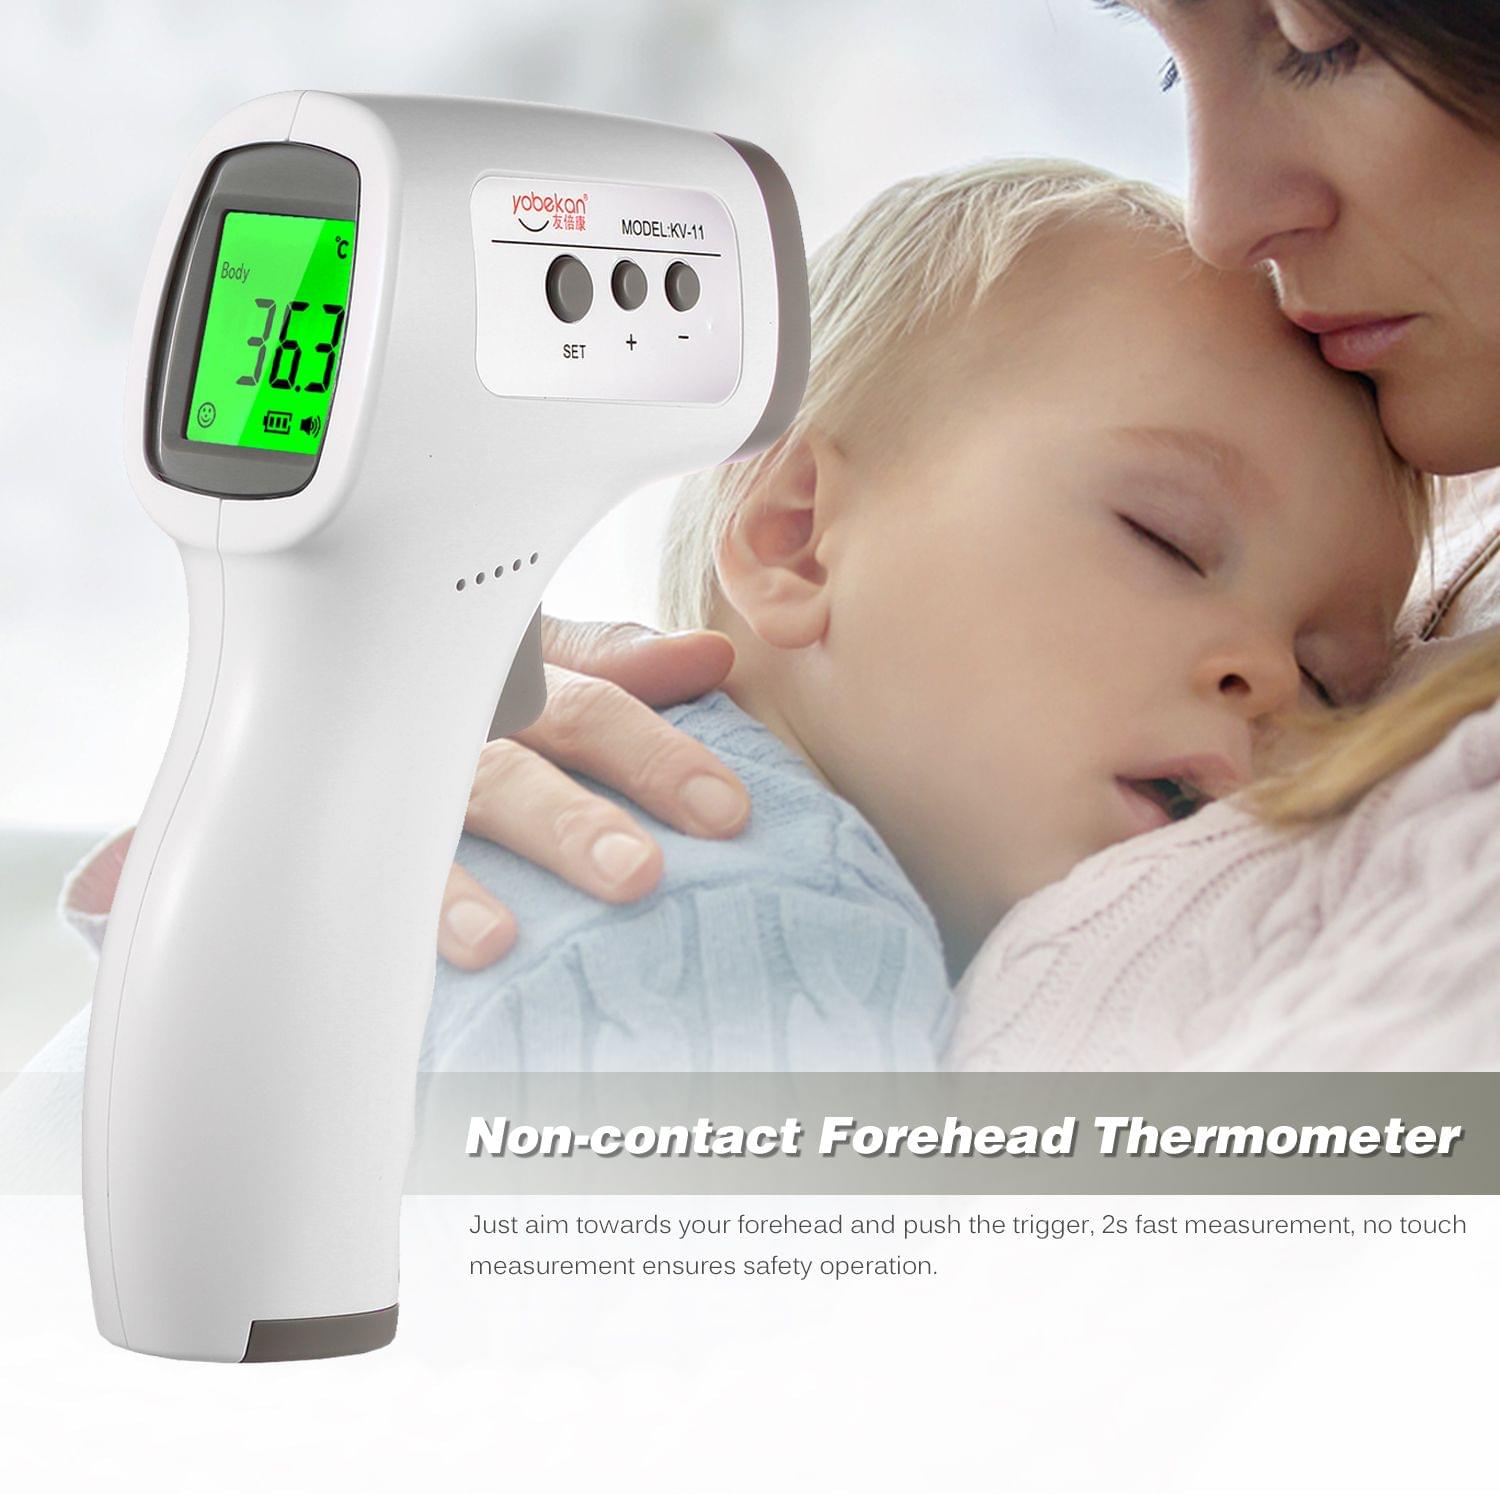 Digital Infrared Forehead Thermometer LCD IR Thermometer - White & Grey